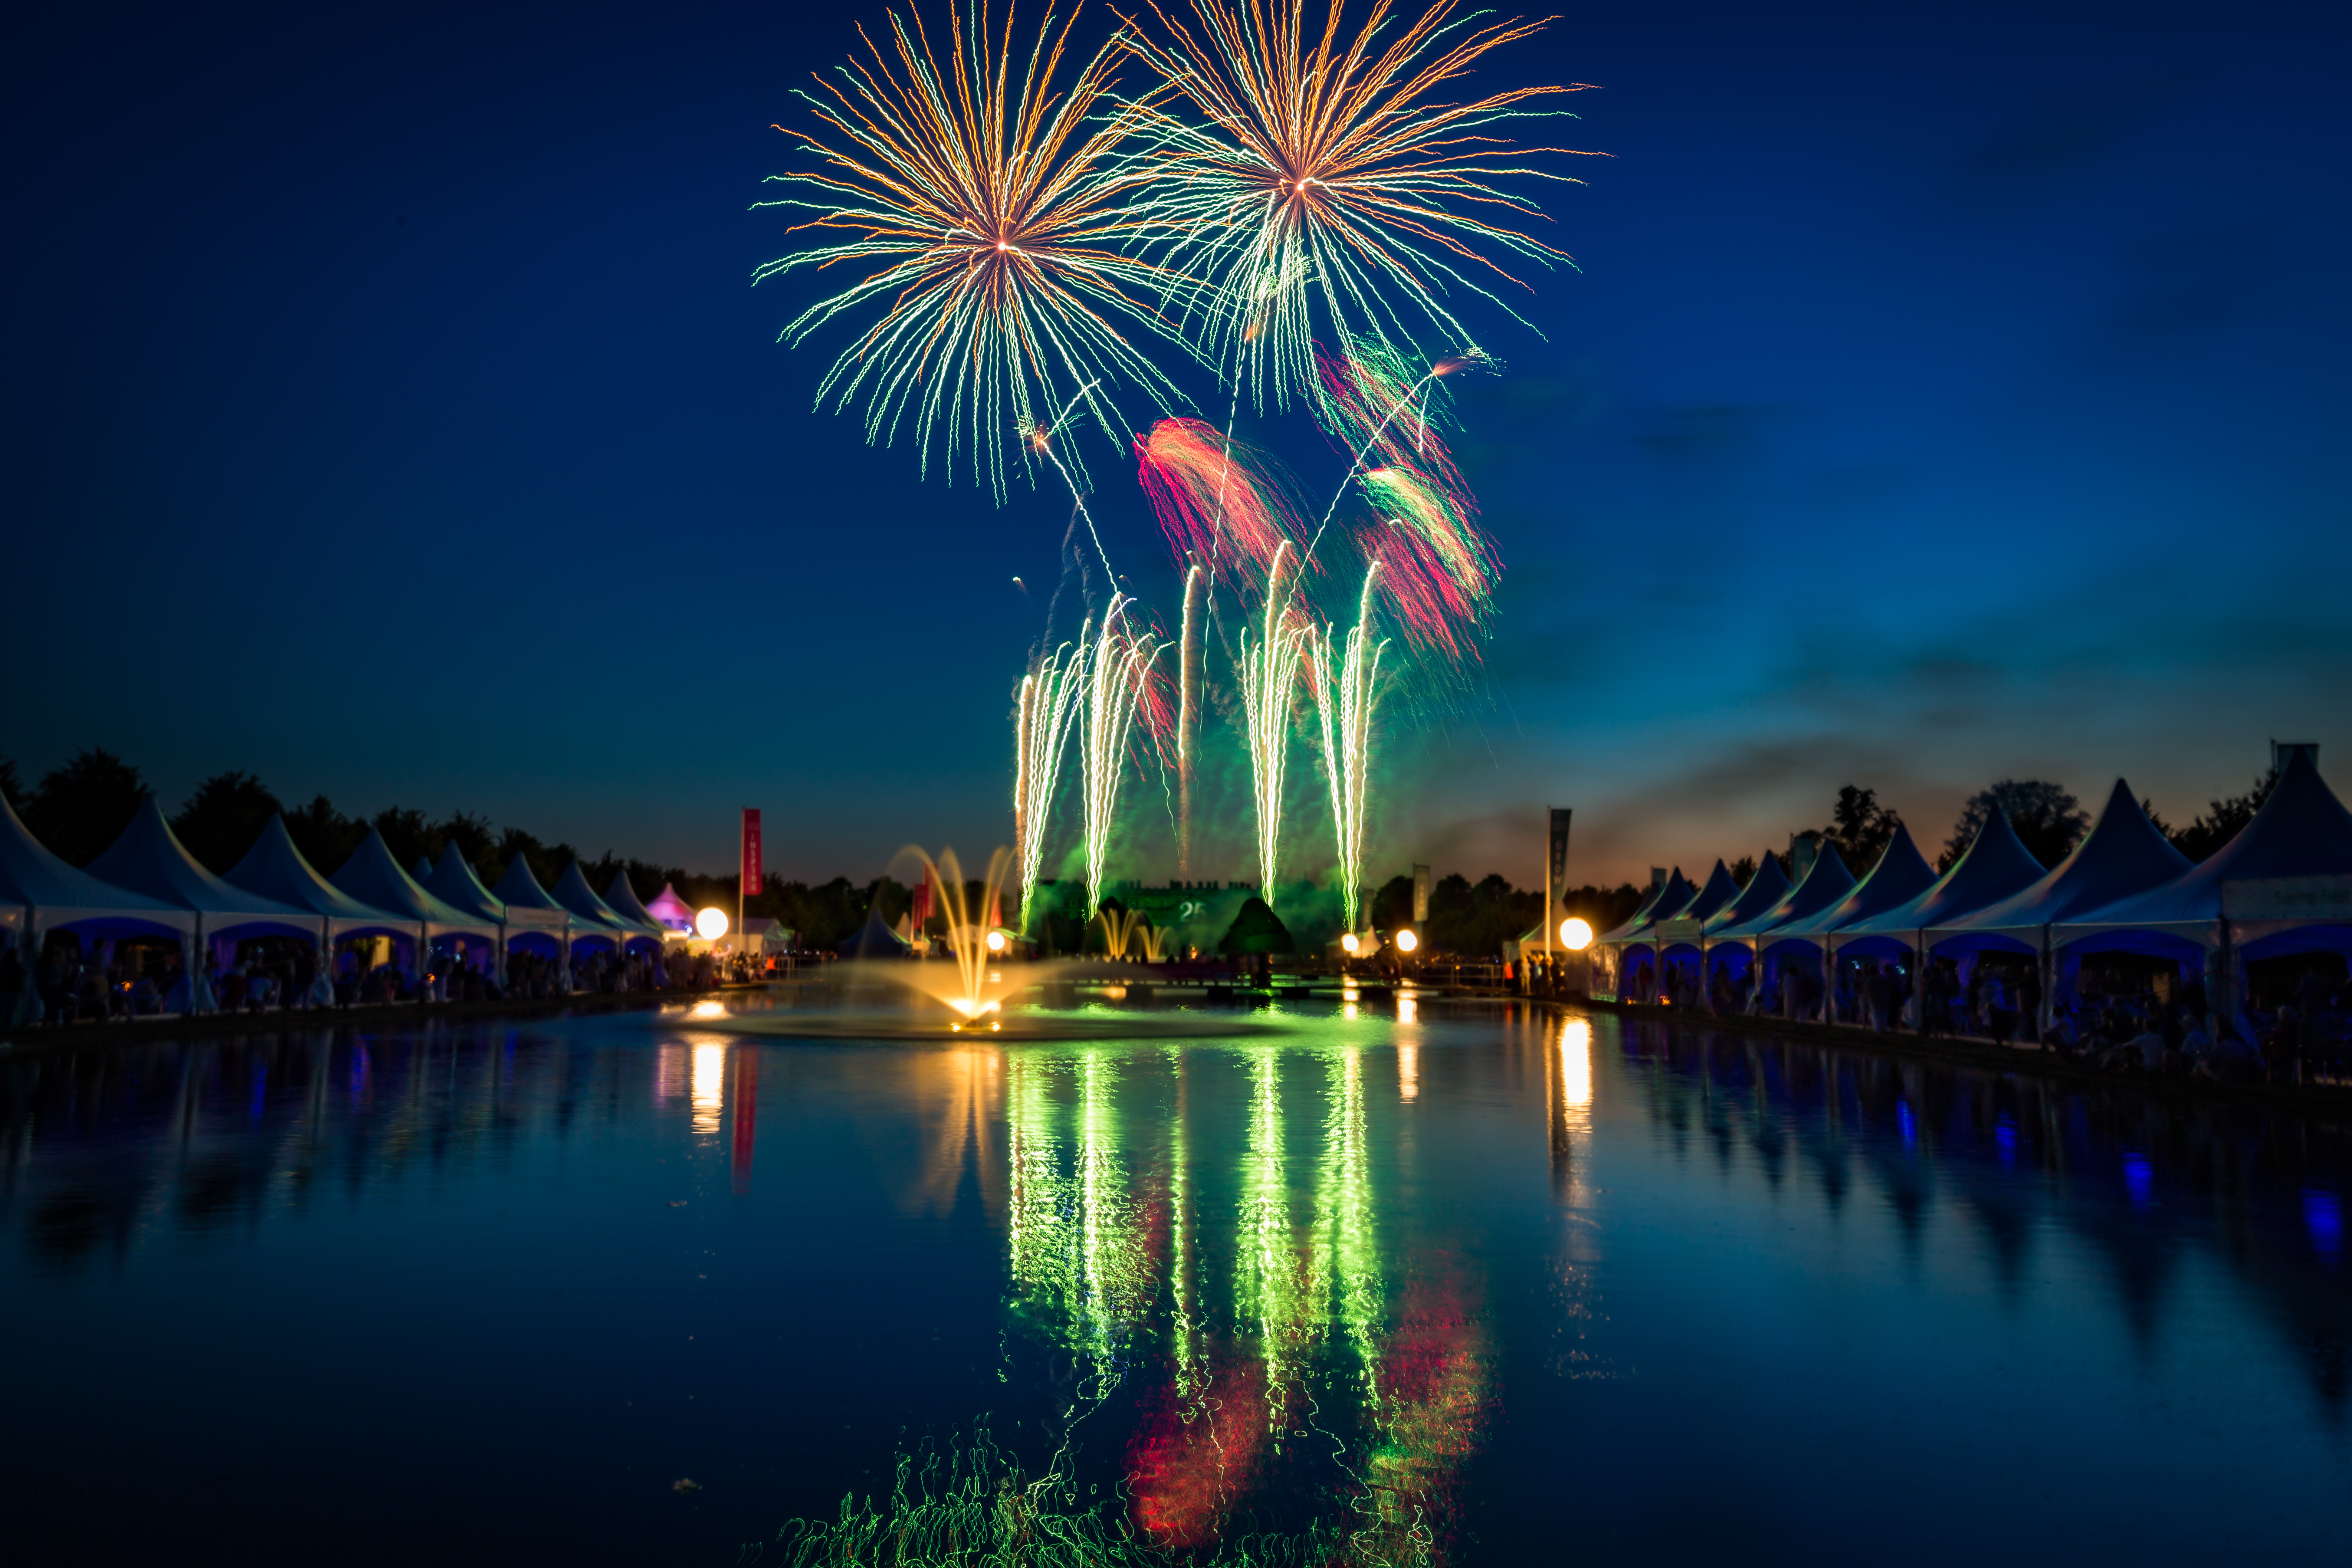 Beautiful reflections in the long water of the fireworks display at Hampton Court Palace for the RHS Hampton Court Palace Flower Show